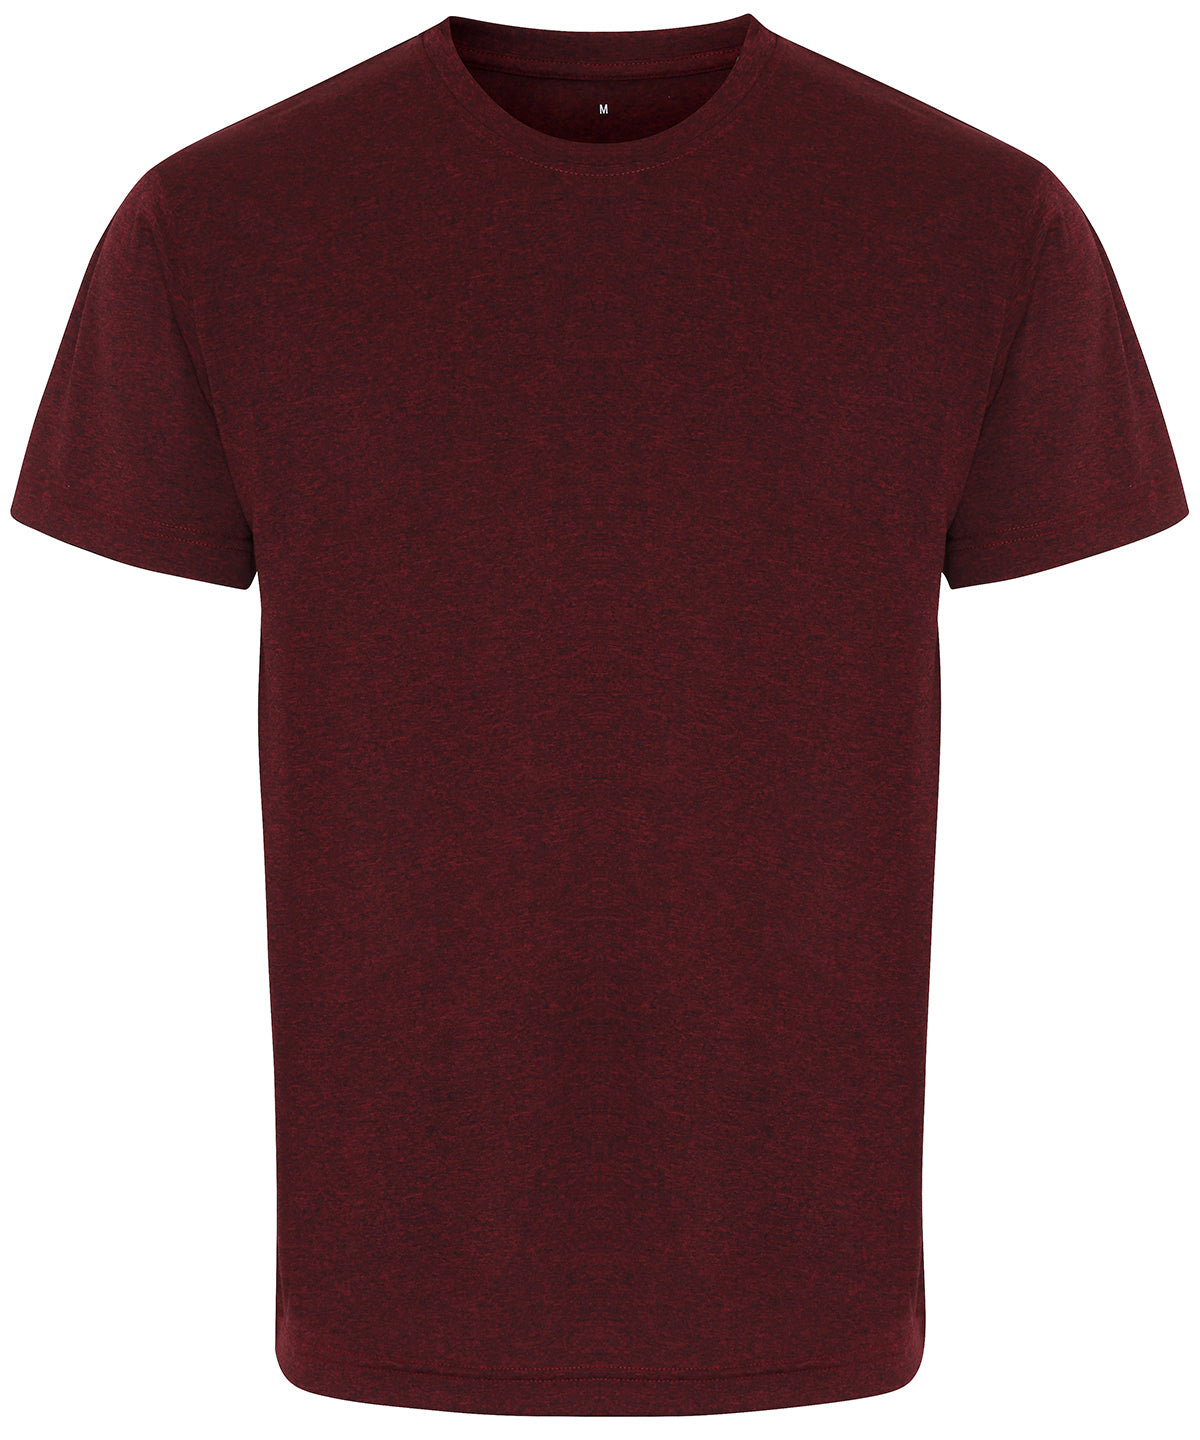 Burgundy/ Black Melange - TriDri® performance t-shirt T-Shirts TriDri® Activewear & Performance, Athleisurewear, Back to the Gym, Exclusives, Gymwear, Must Haves, New Colours For 2022, Outdoor Sports, Plus Sizes, Rebrandable, Sports & Leisure, T-Shirts & Vests, Team Sportswear, UPF Protection Schoolwear Centres